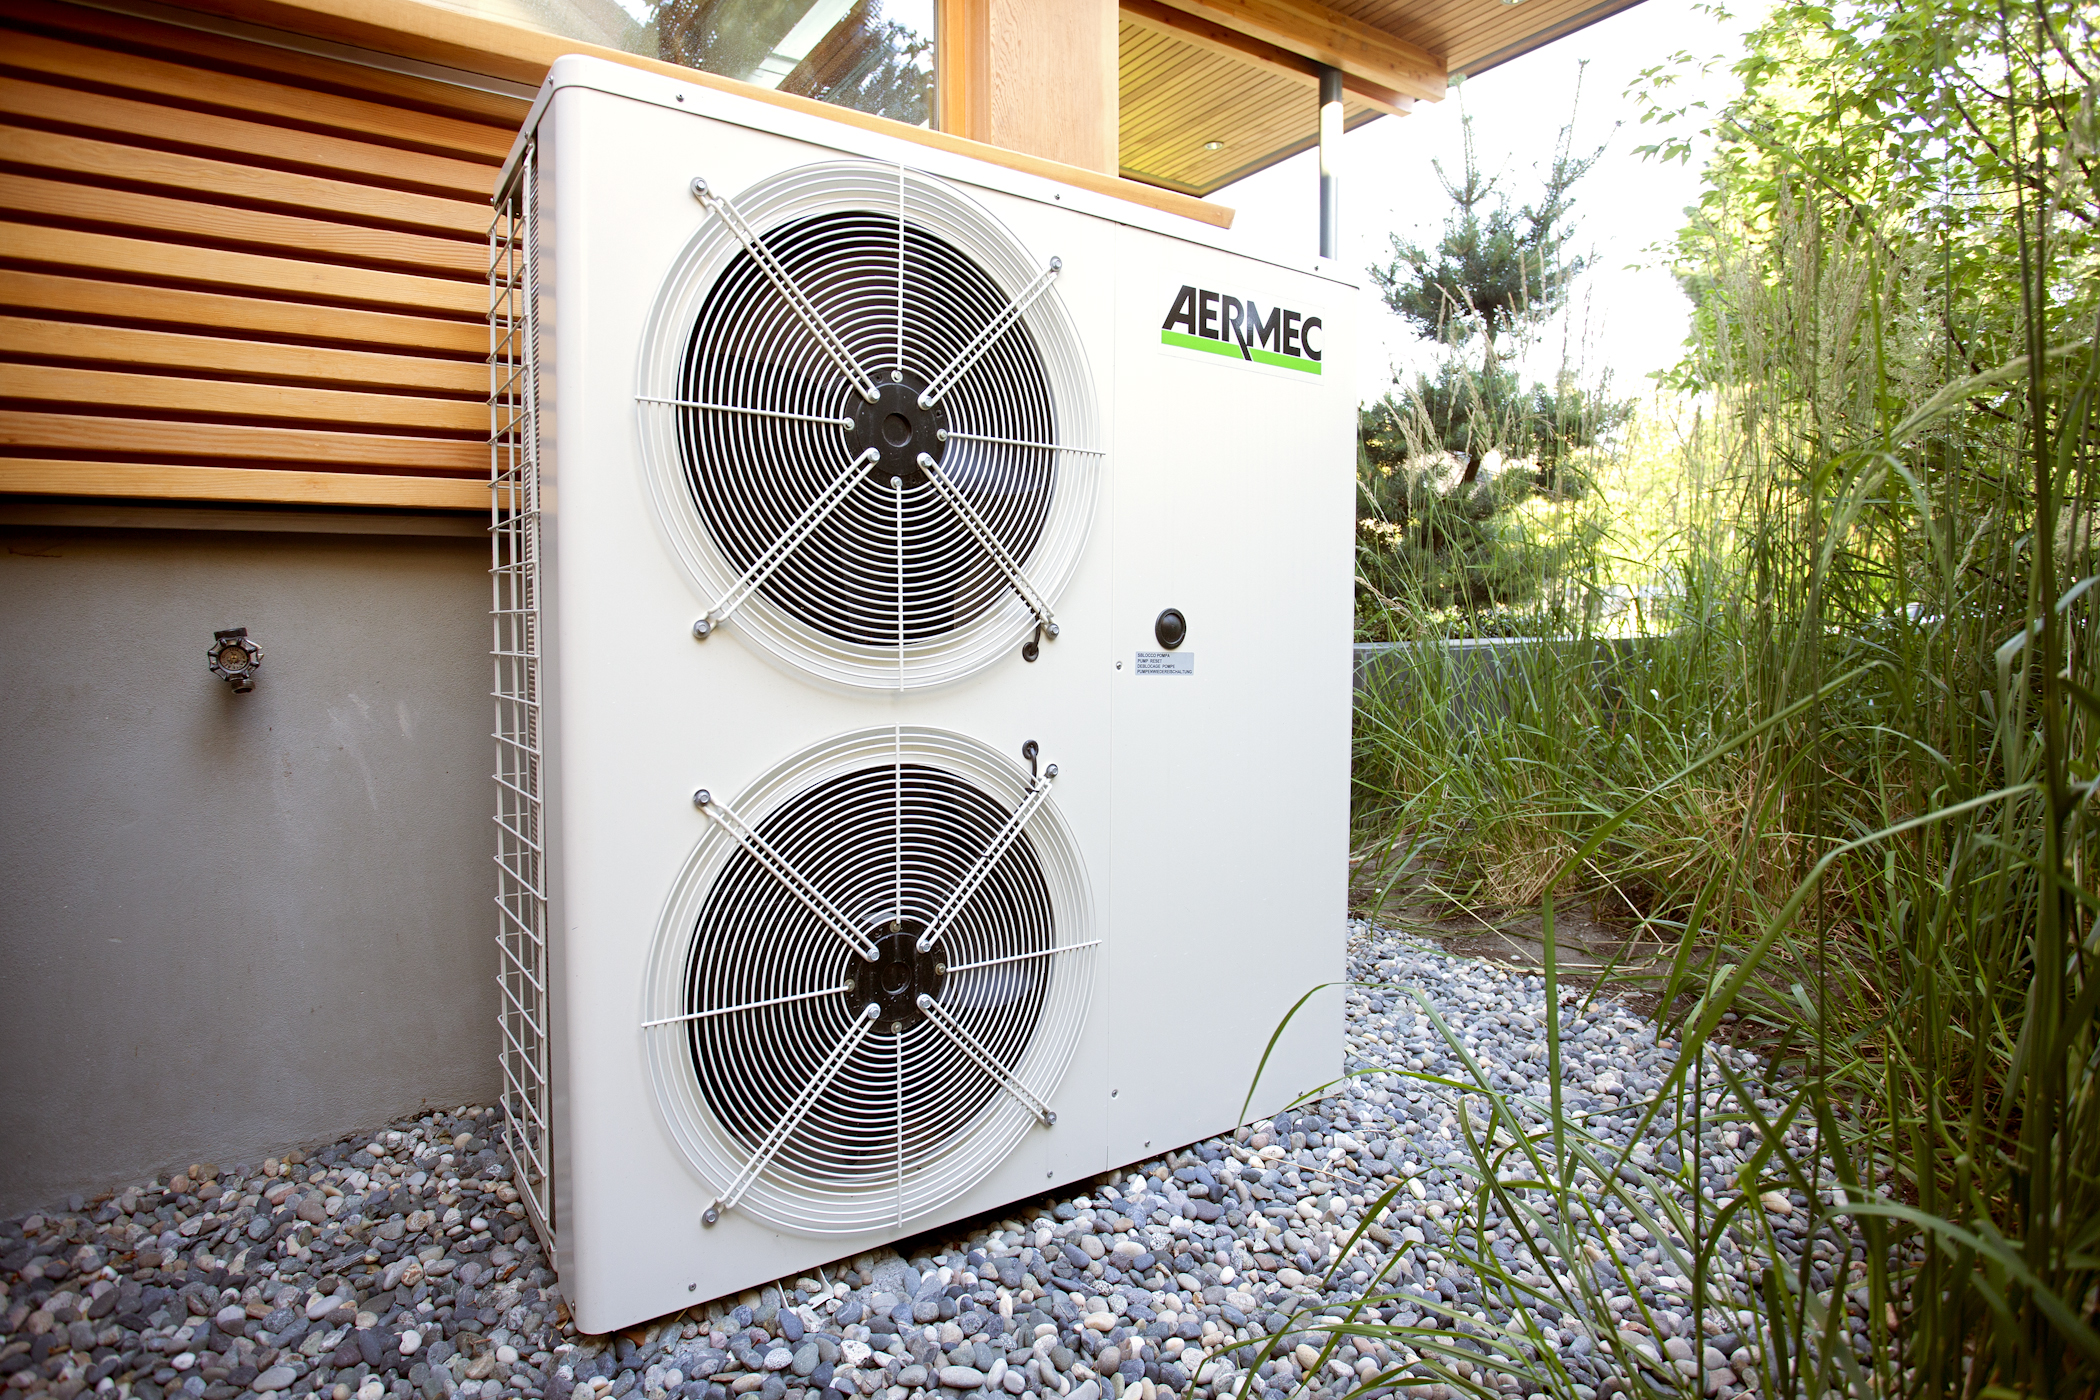 AERMEC heat pump installed in a sustainable house in Vancouver.